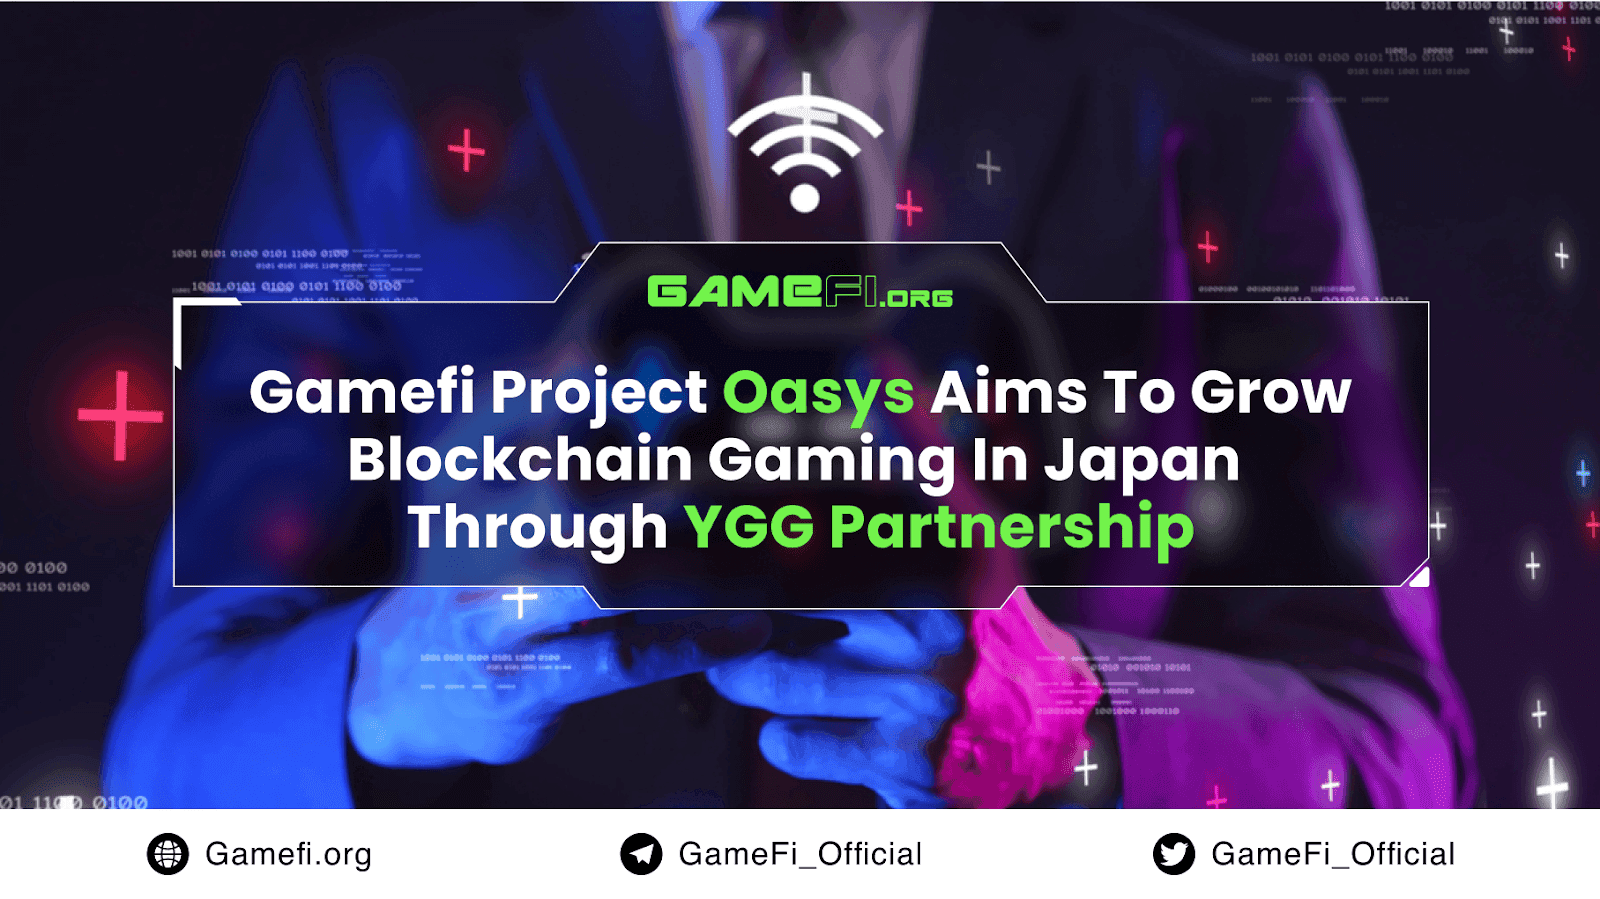 GameFi Project Oasys Aims To Grow Blockchain Gaming In Japan Through YGG Partnership